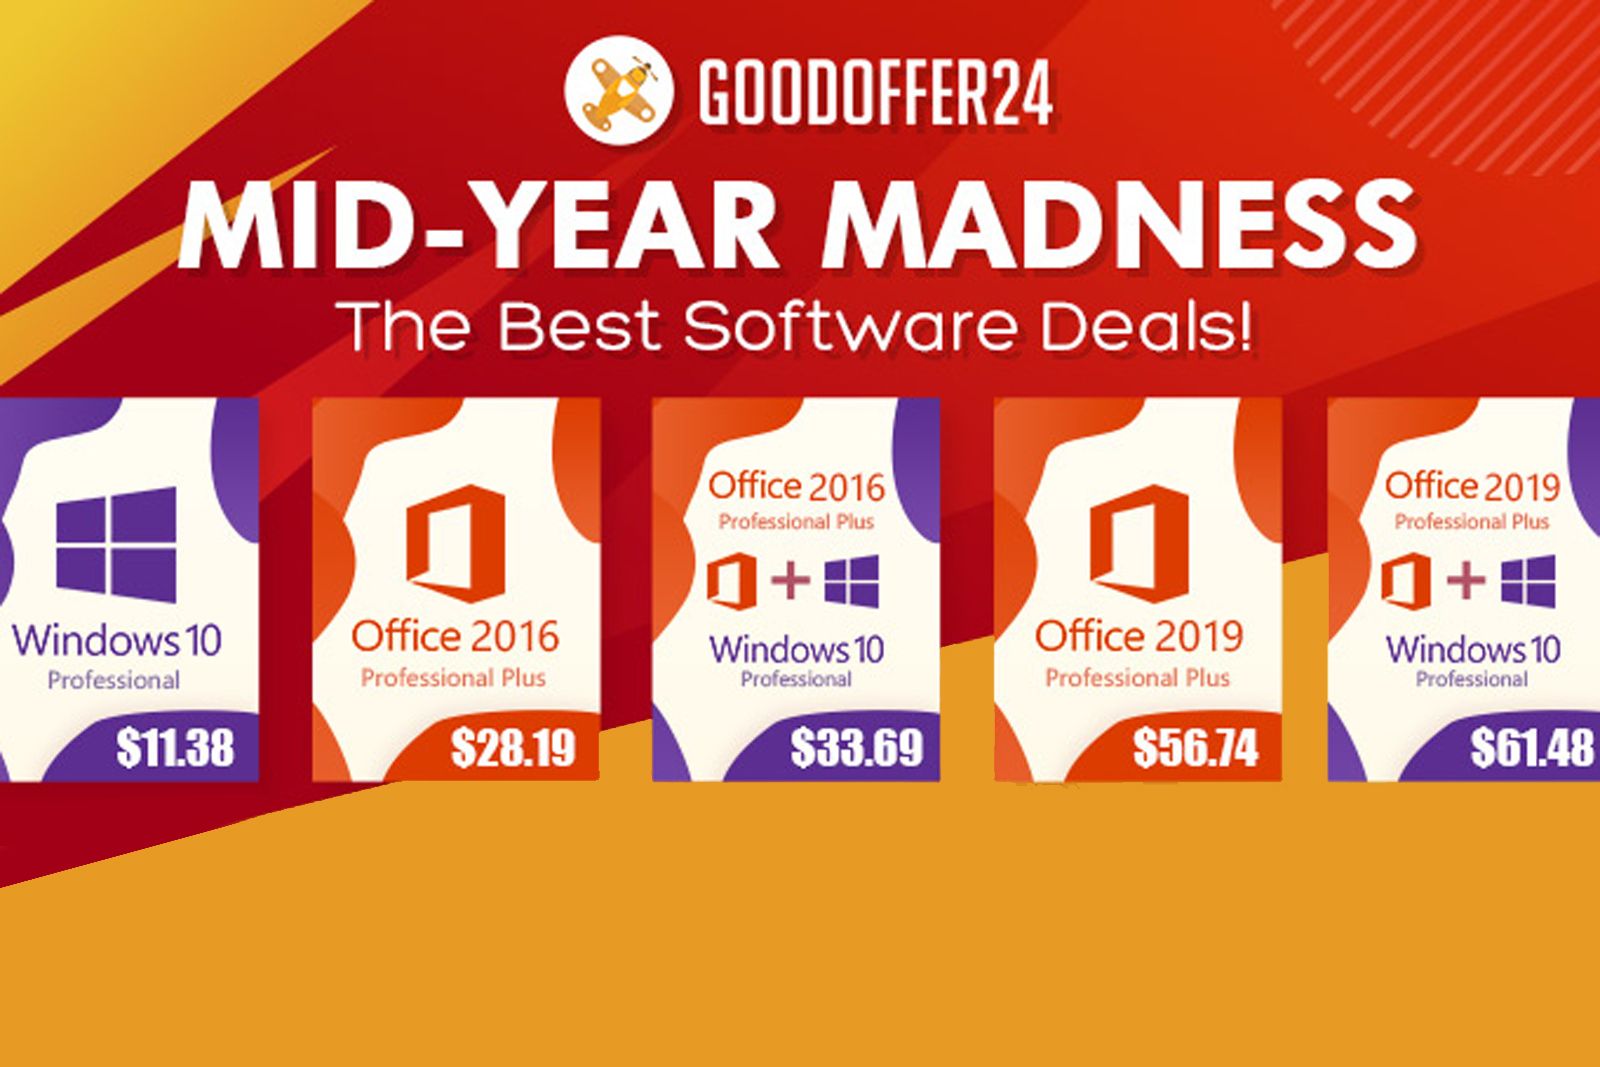 Mid-year madness hits GoodOffer24 The best software deals image 1